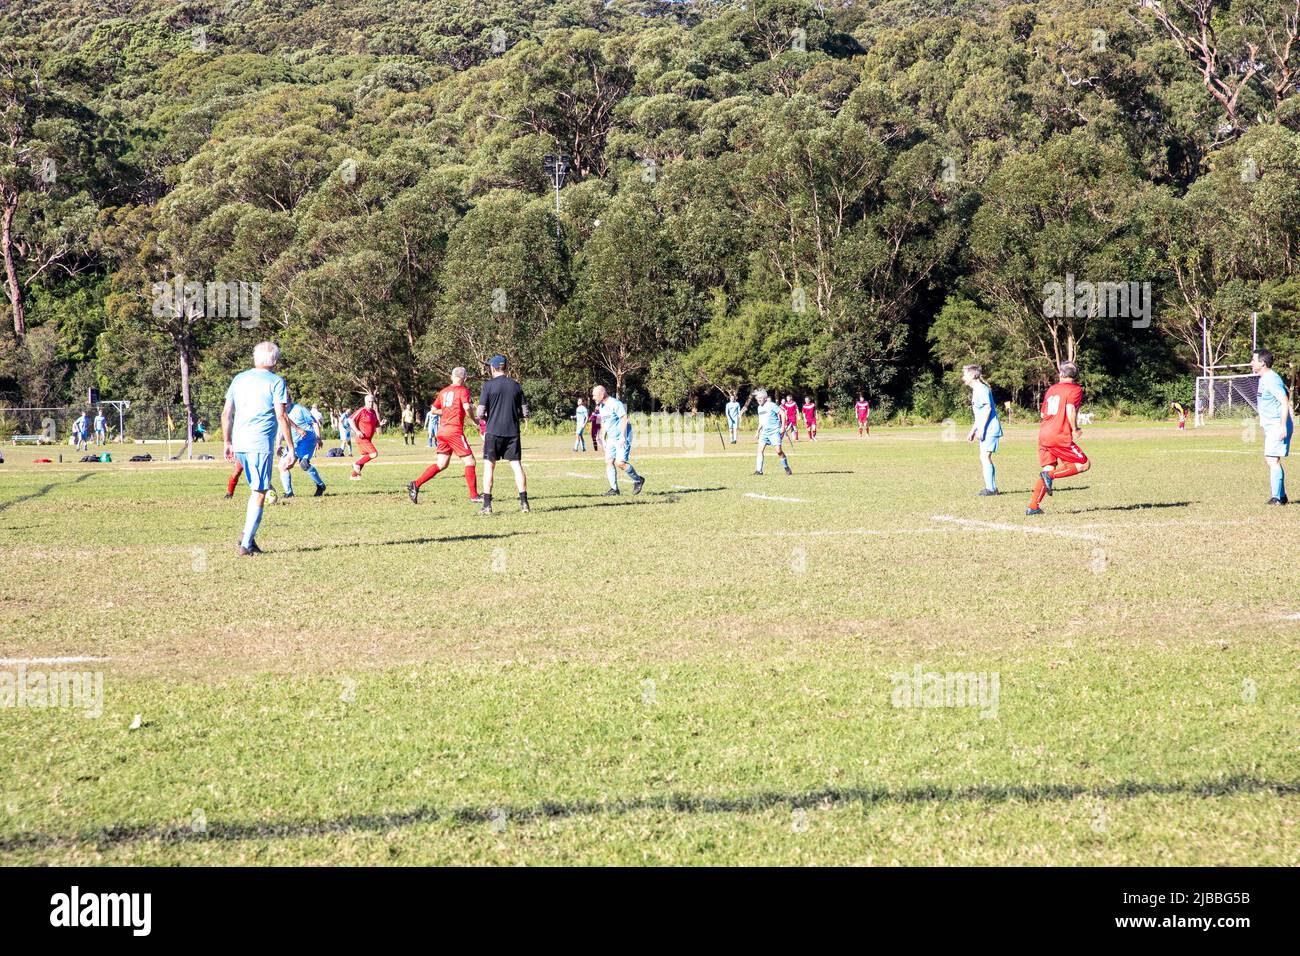 Amateur soccer football match played at Balmoral Oval in Mosman,Sydney, over 45's age group players,Australia Stock Photo